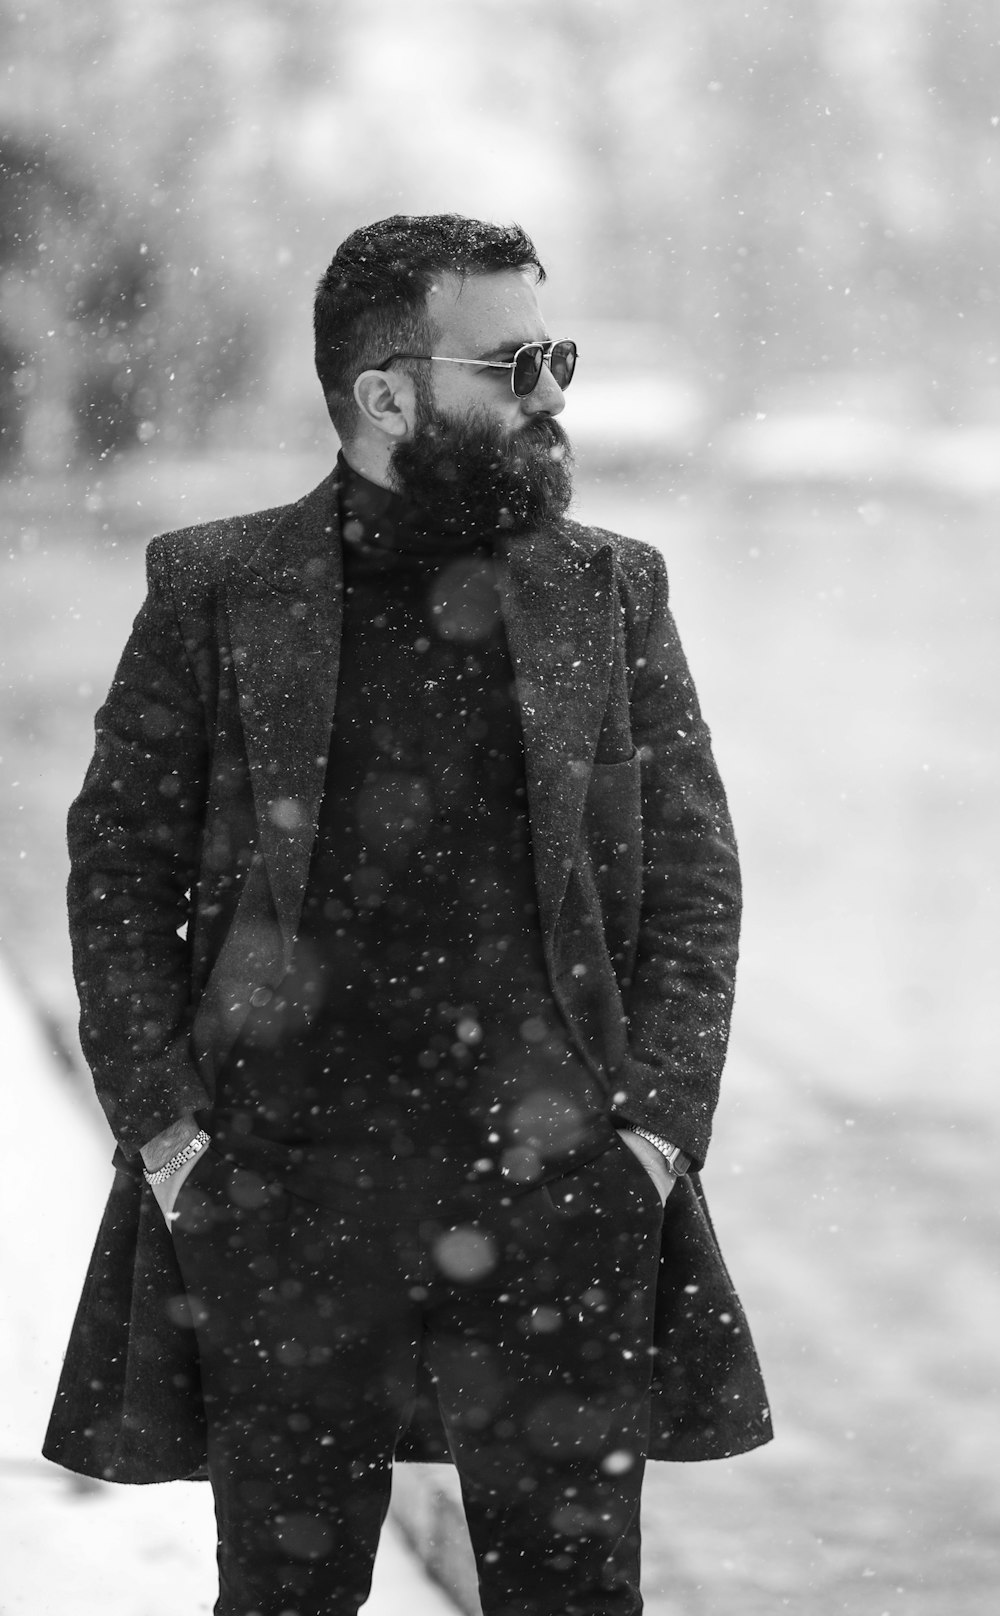 a man in a coat and sunglasses standing in the snow